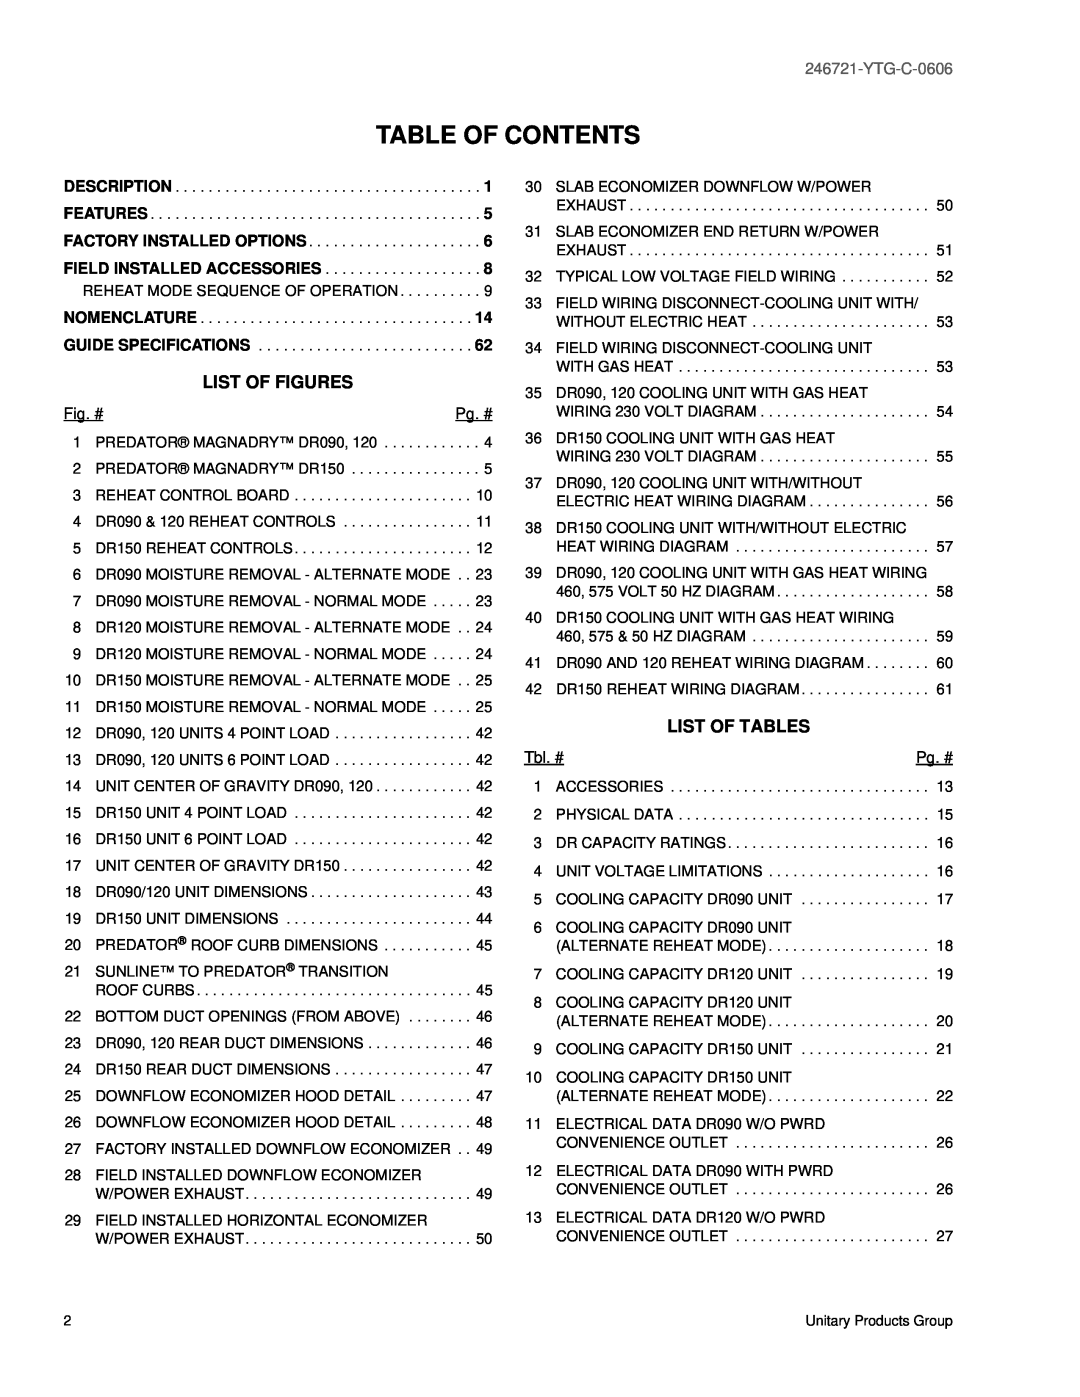 York DR150, DR120, DR090 manual Table Of Contents, List Of Figures, List Of Tables, YTG-C-0606 